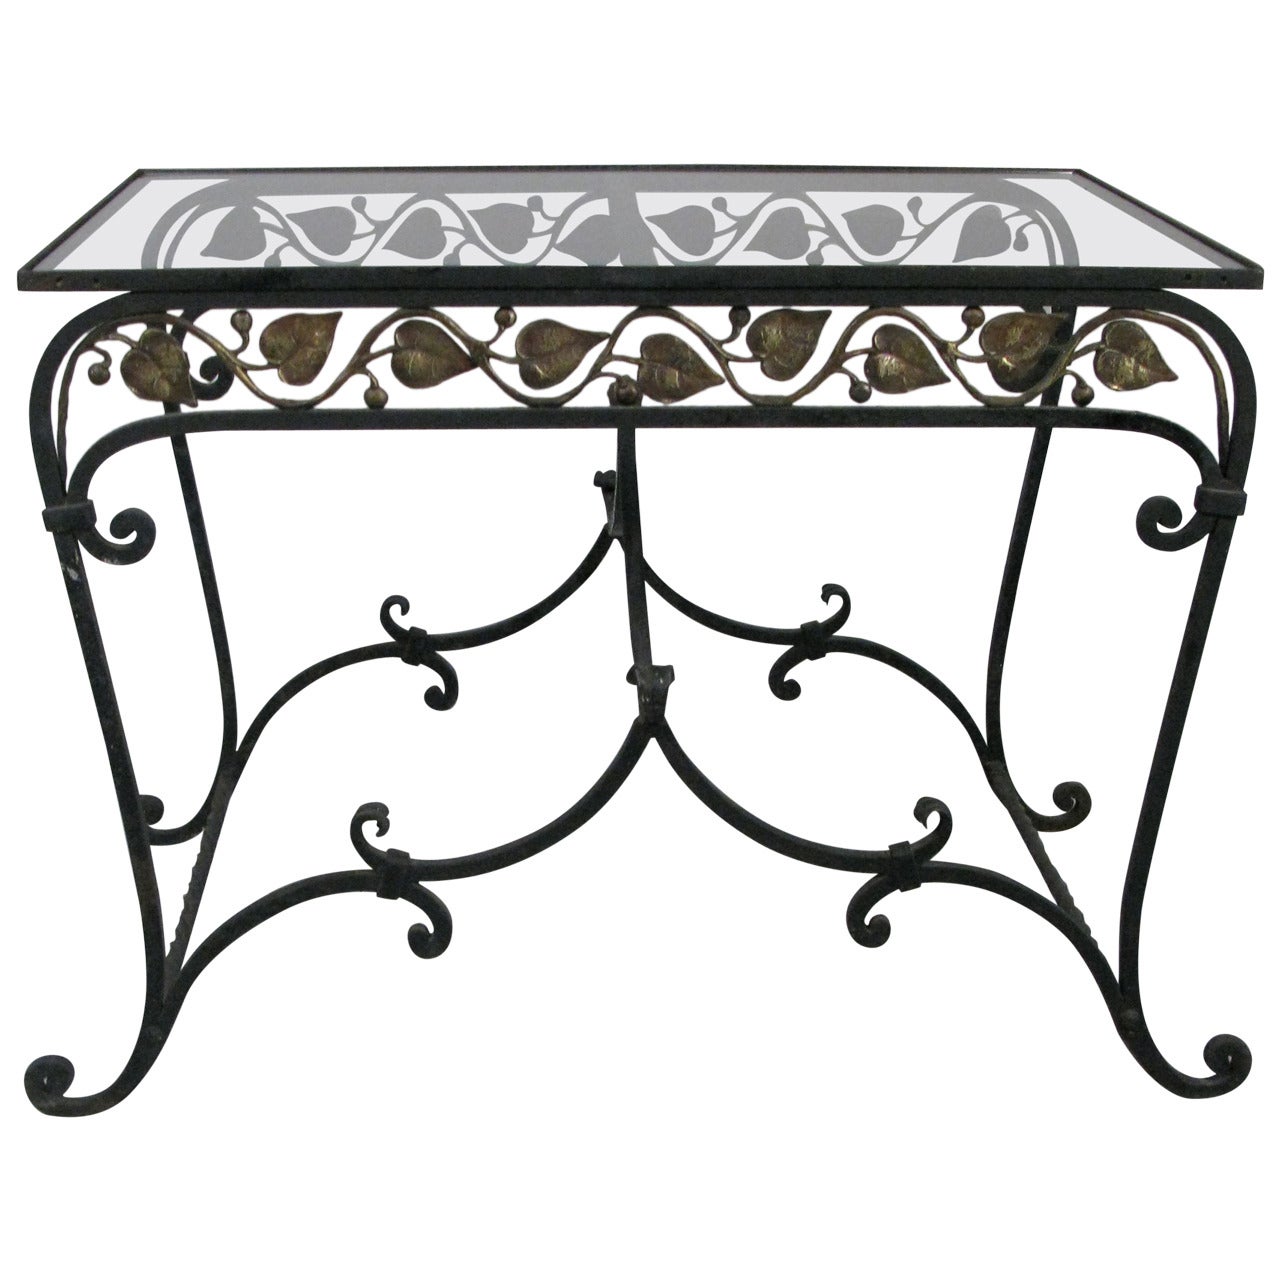 1950s Wrought Iron Garden Occasional Table For Sale